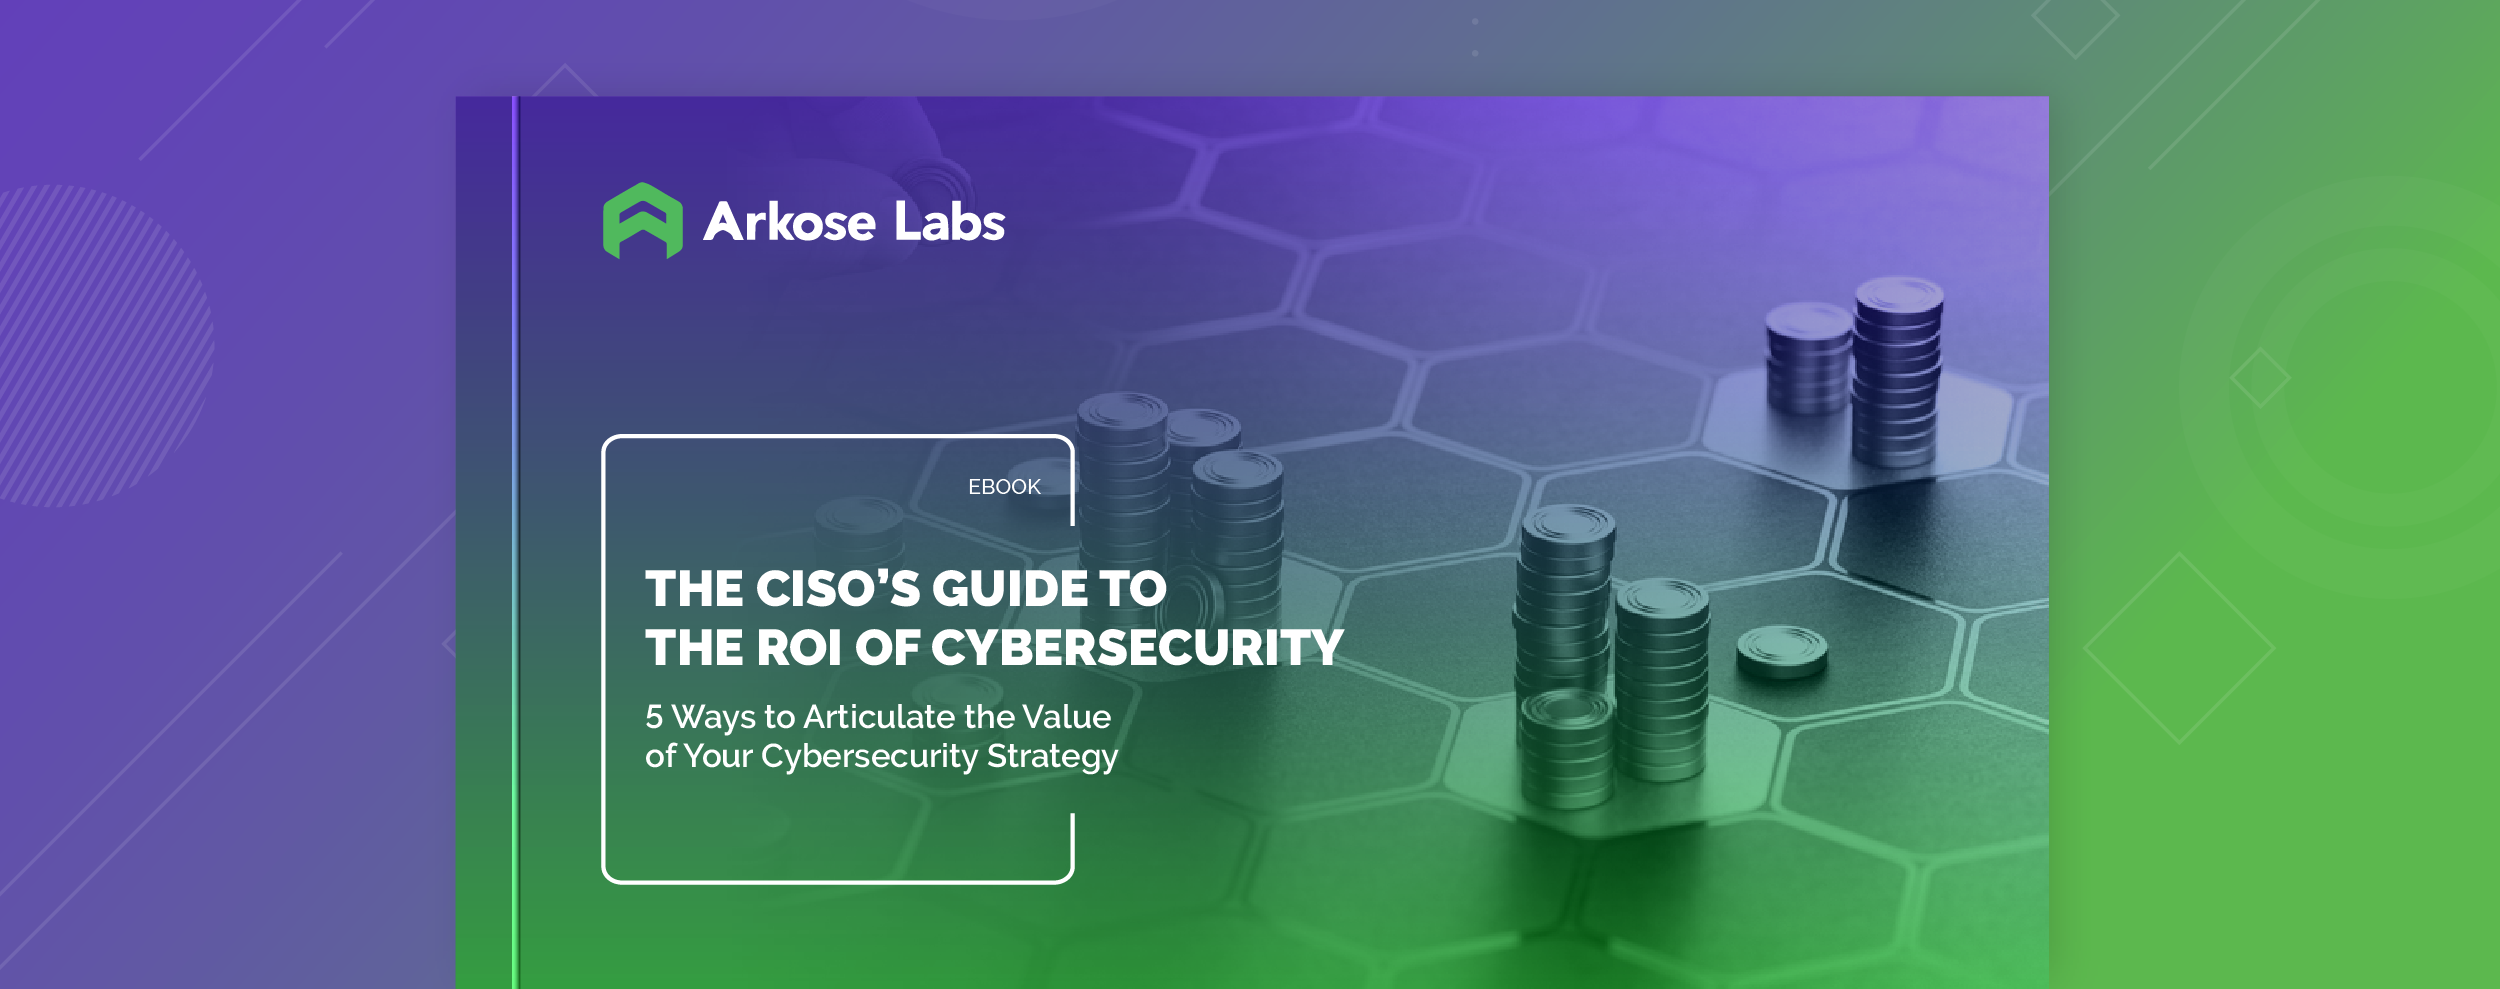 CISO’s Guide: The ROI of Cybersecurity